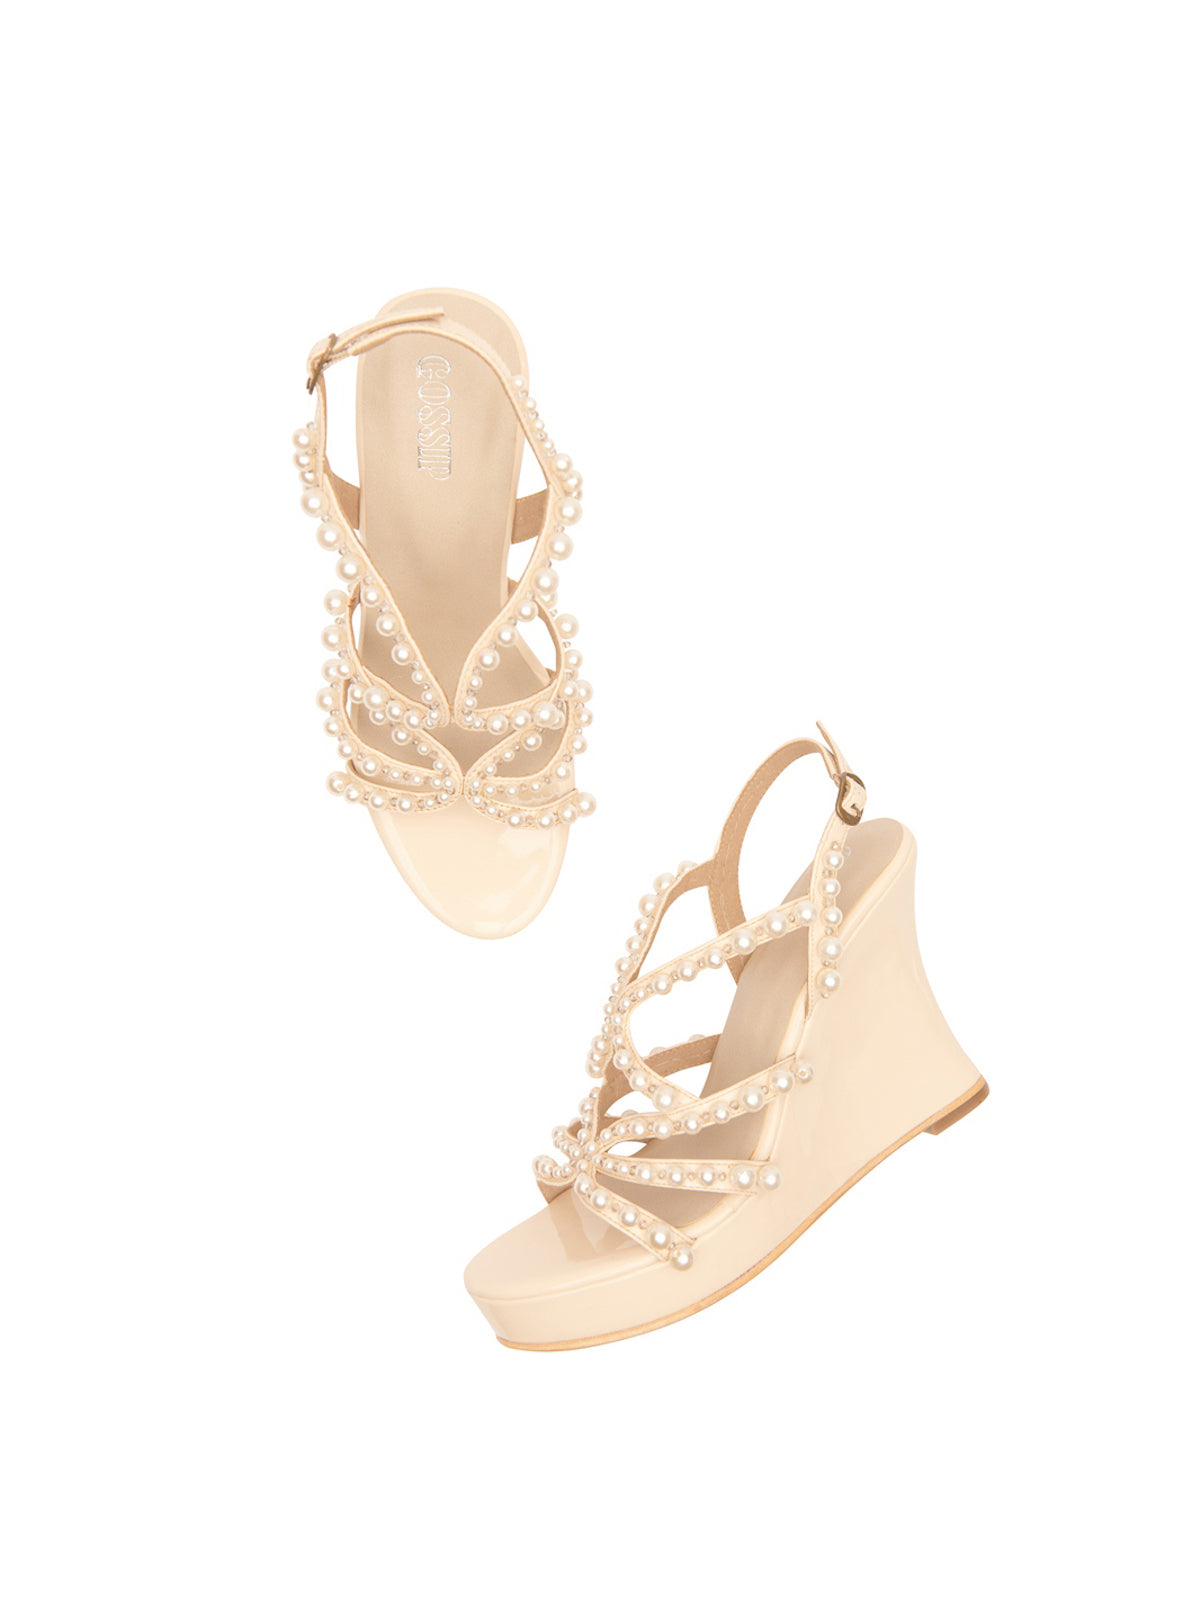 Classic Platforms with Pearls